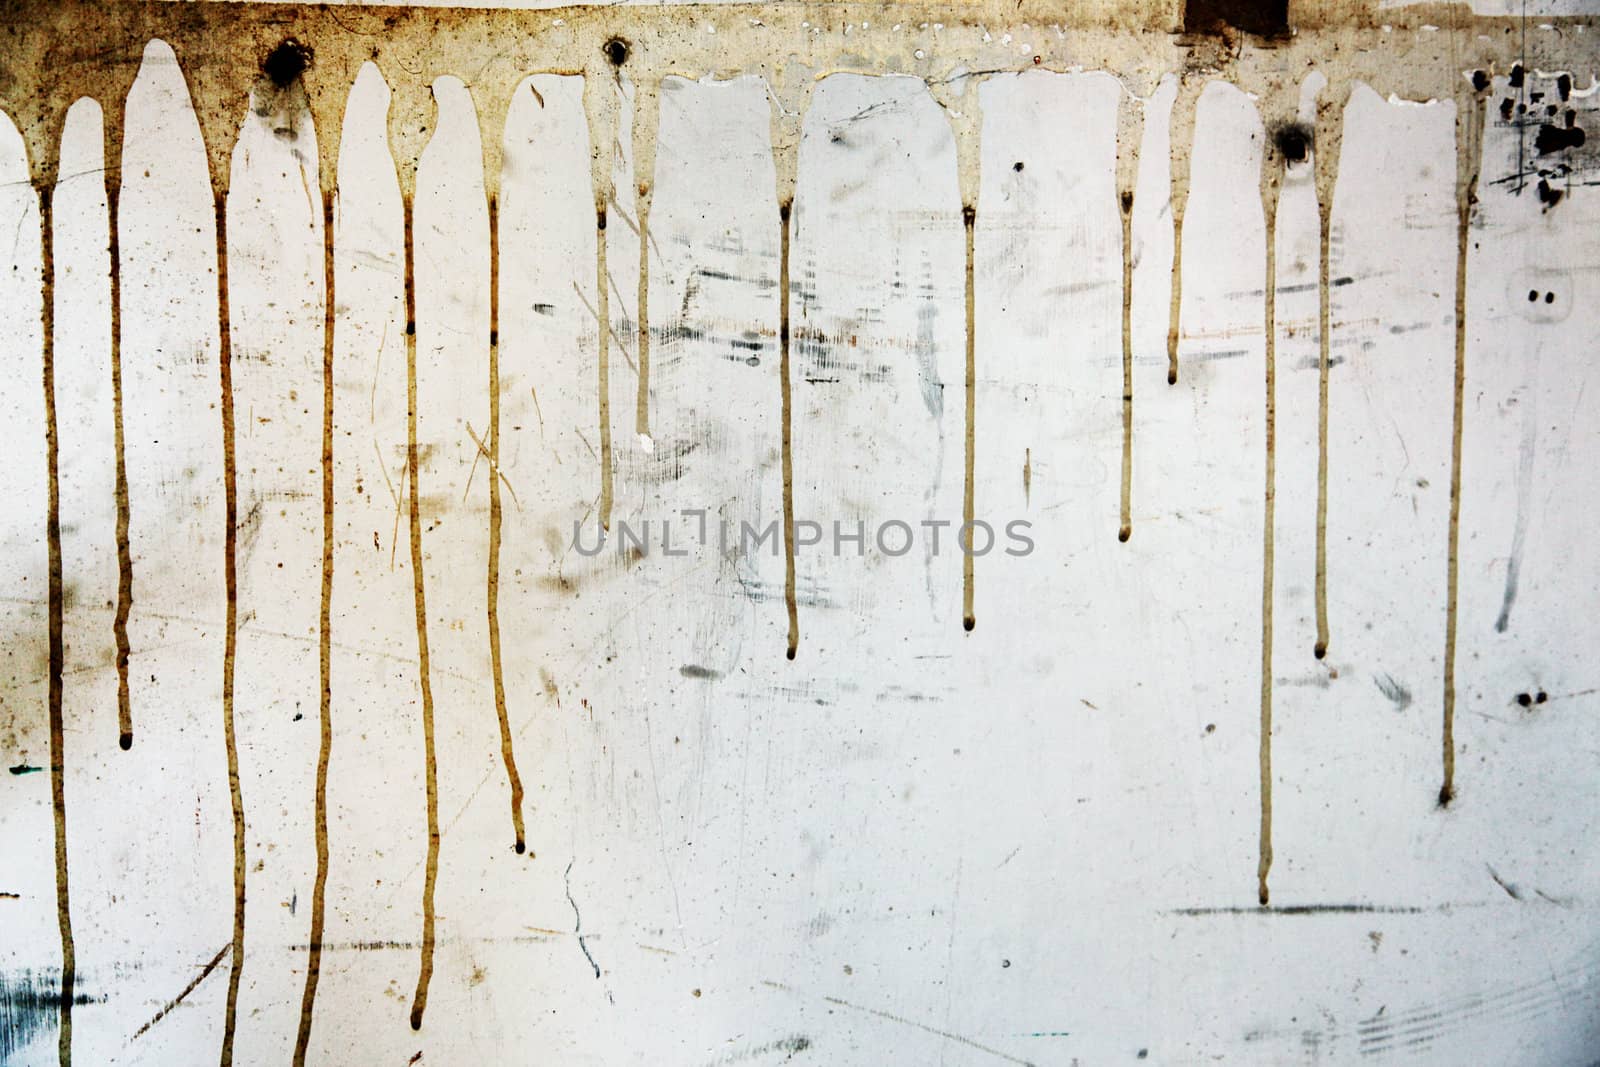 Messy substance dripping down a grungy wall